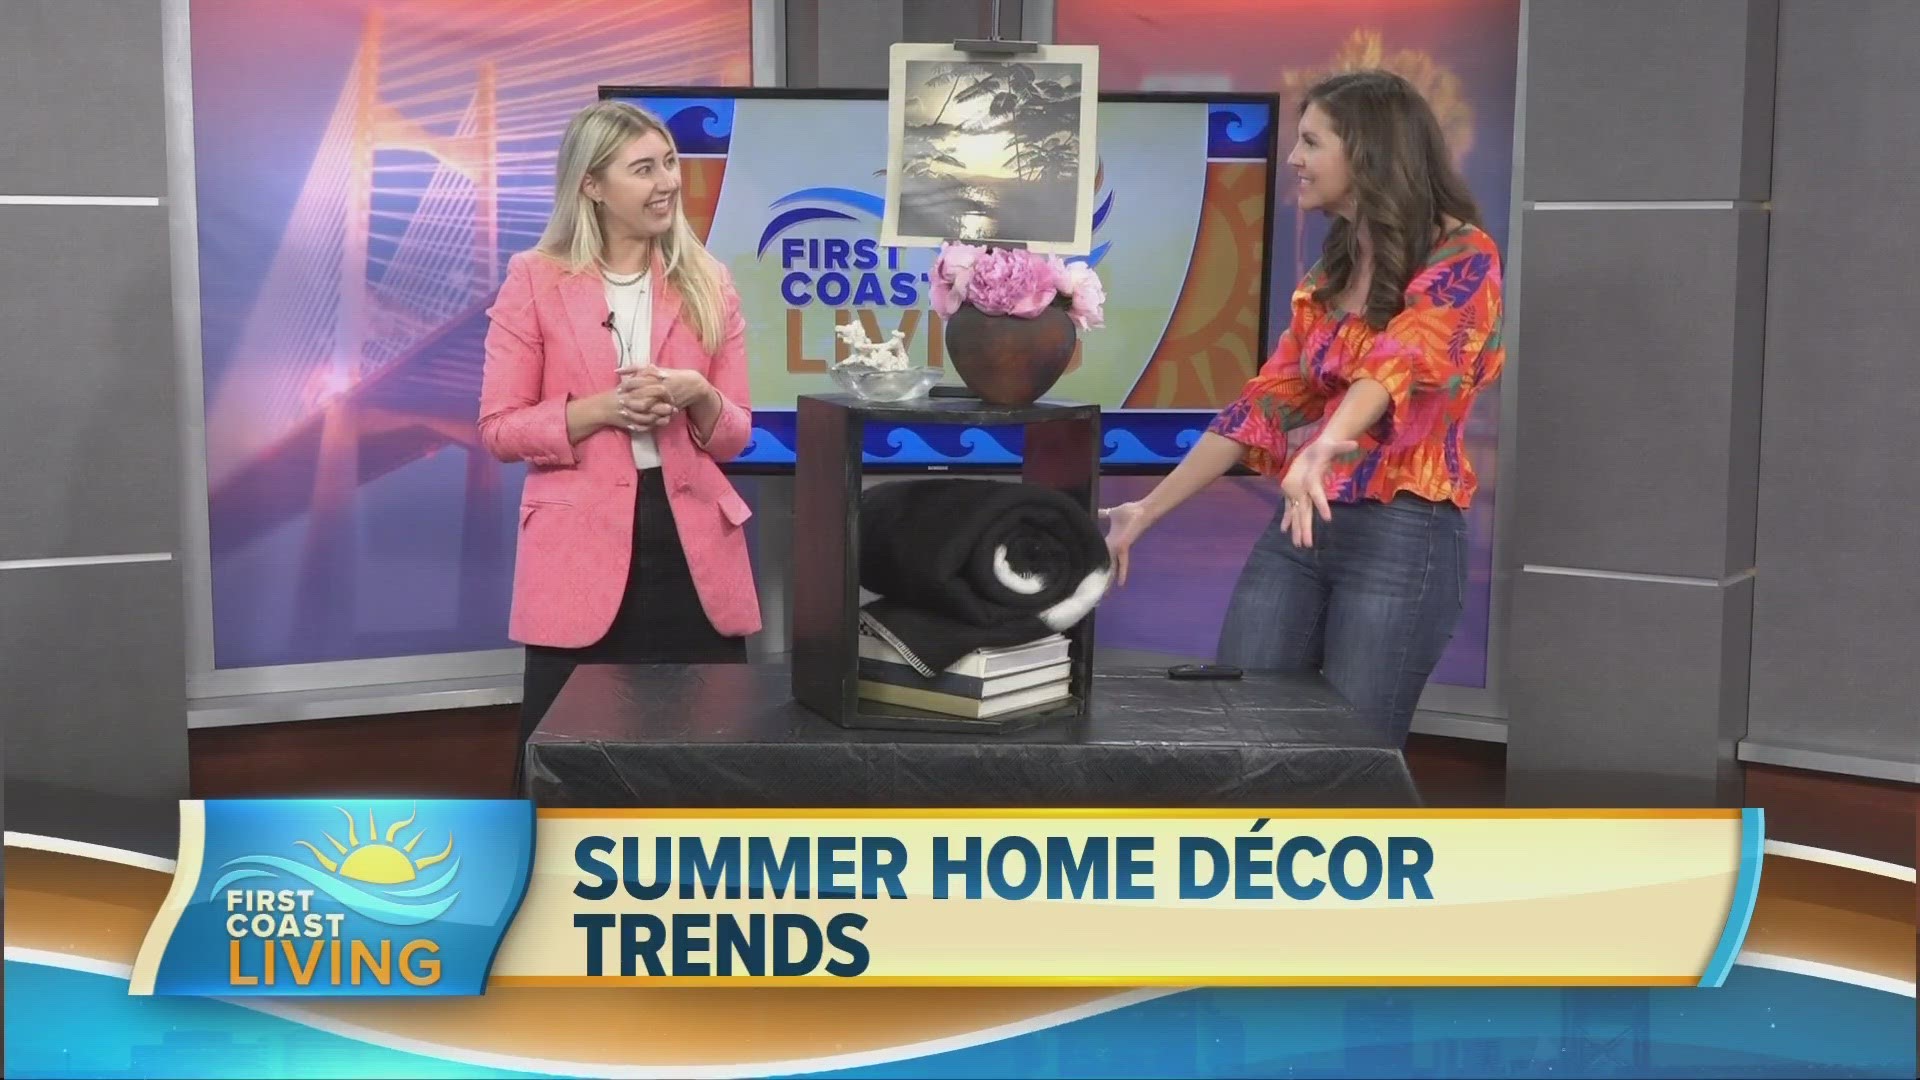 Local vintage expert and author, Virginia Chamlee shares advice and ideas on styling a side table, according to new summer trends.